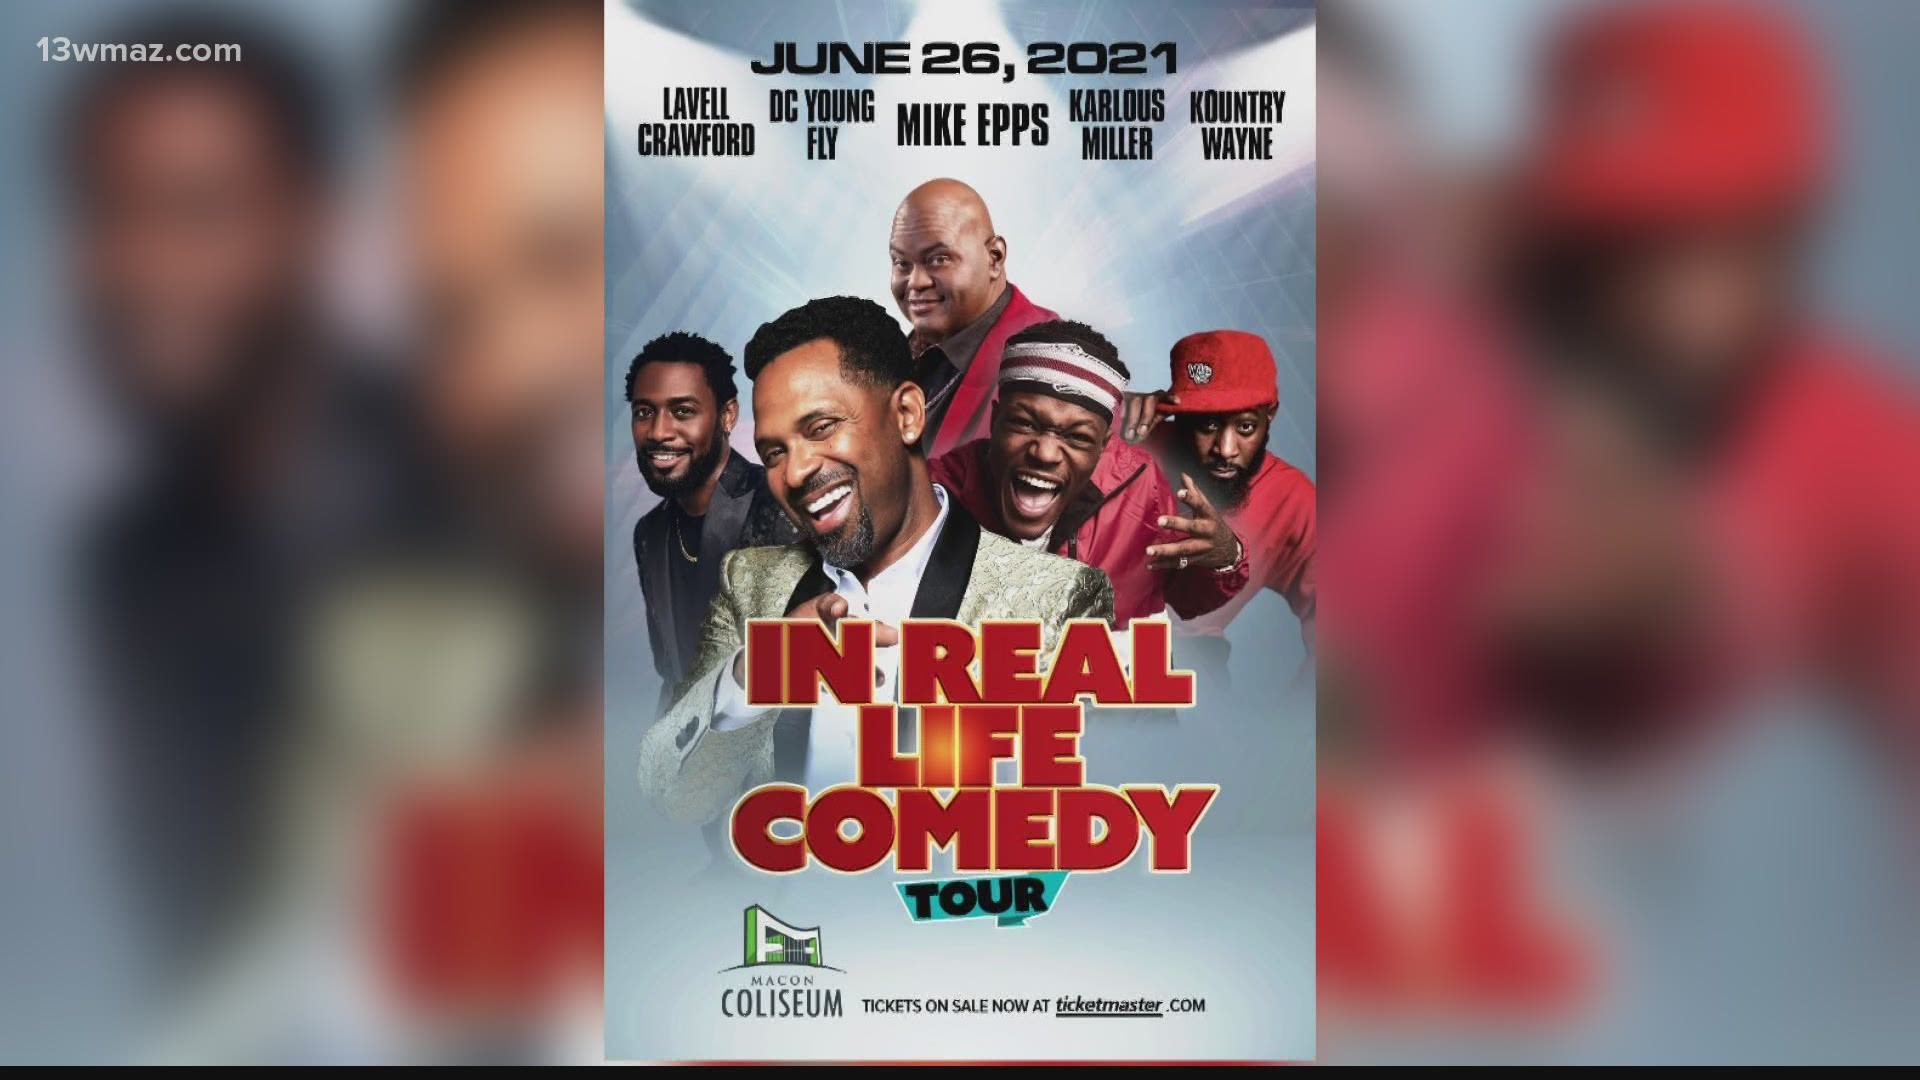 Tickets for the In Real Life Comedy Tour will be going on sale this week for the show's Macon stop, which is scheduled for June 26.